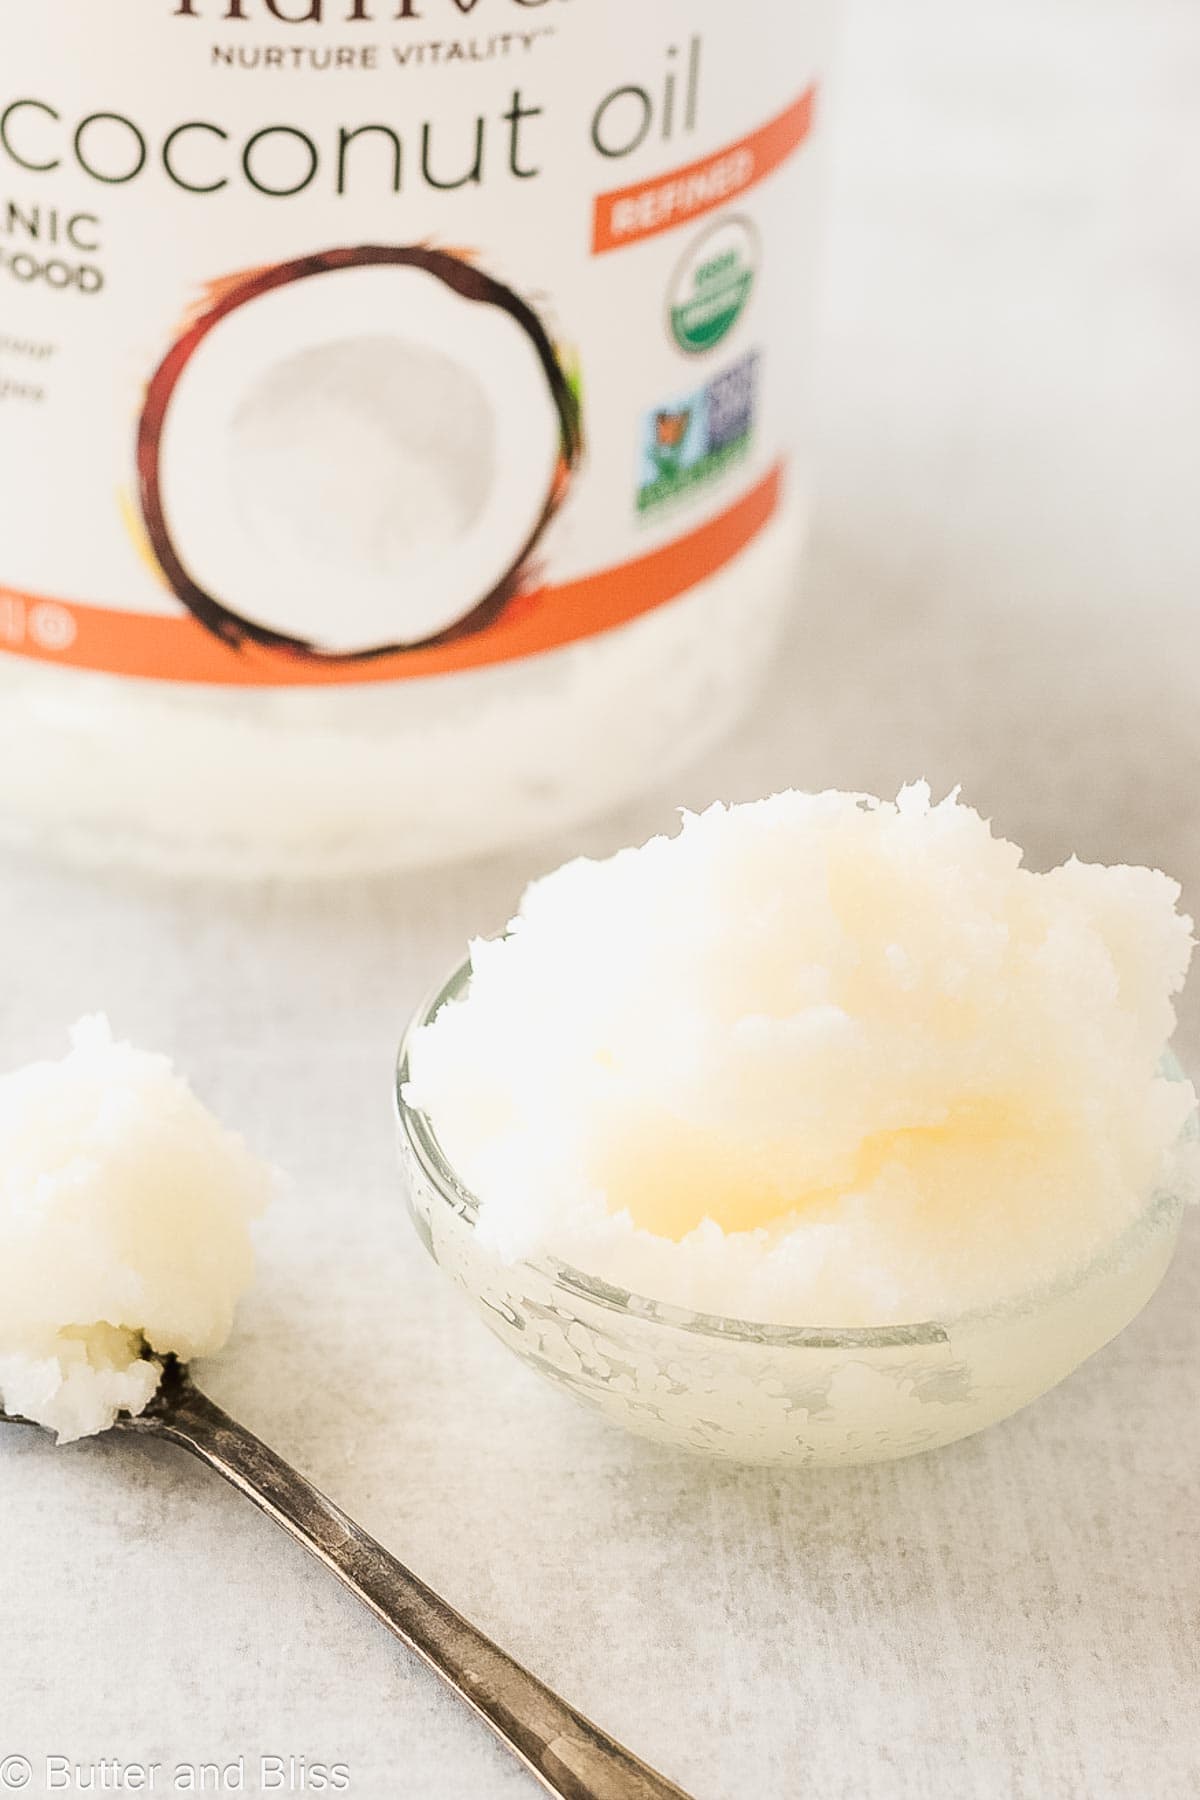 Solid coconut oil in a small bowl.